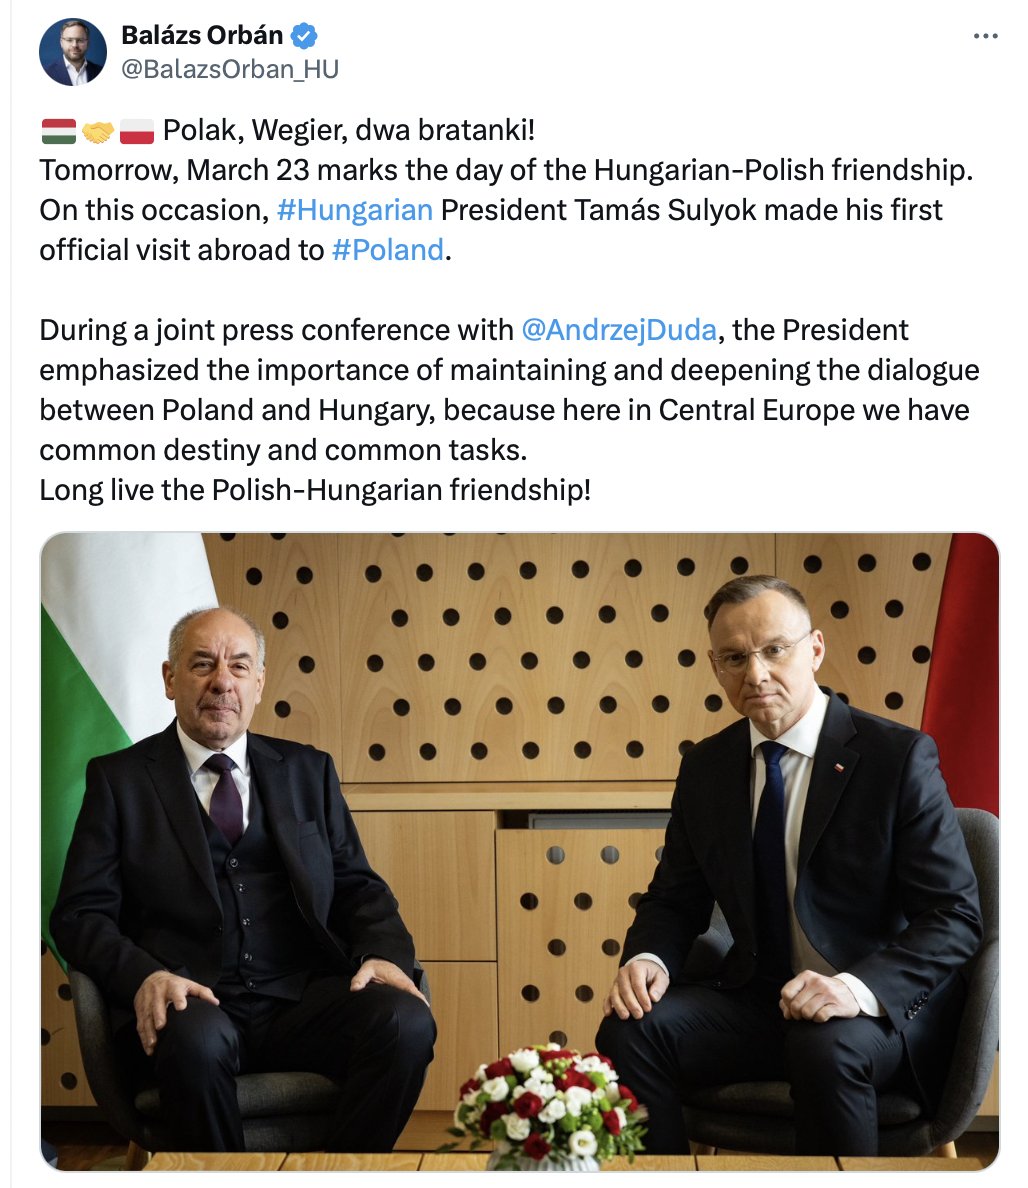 I have no idea who advised @AndrzejDuda that it'd be a good idea to host the new Hungarian president on his first official visit while Tamás Sulyok is currently embroiled in a scandal at home because he lied about his father's Nazi past. Sulyok claimed his father was unfairly…